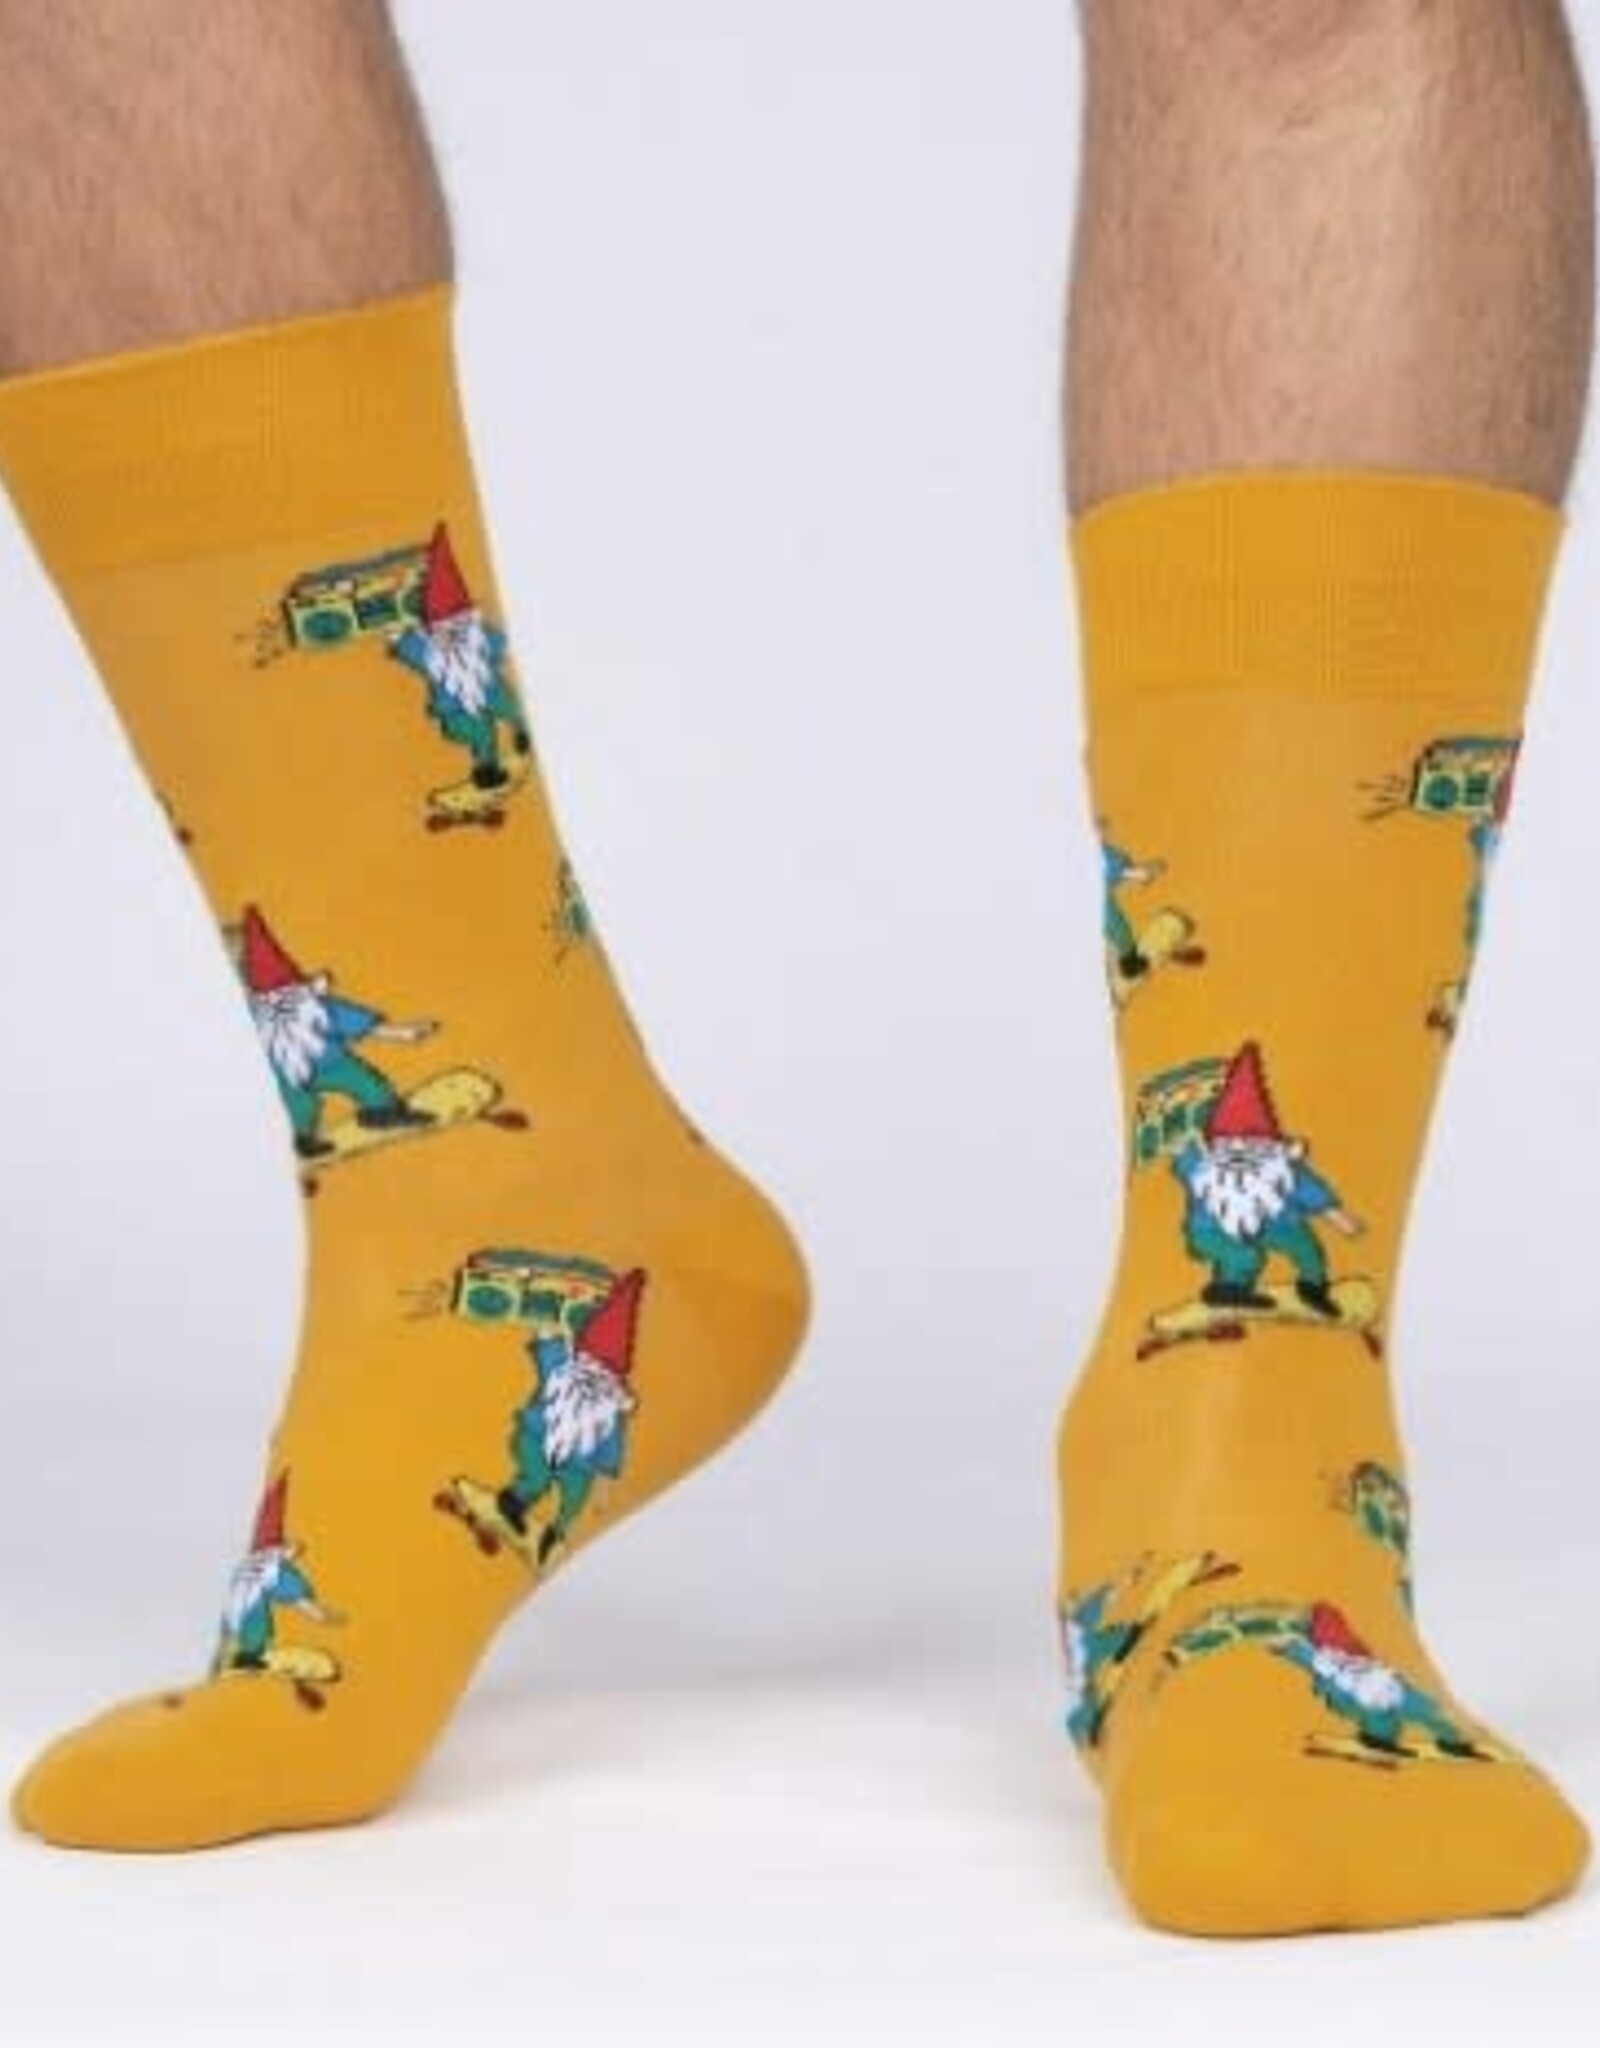 Sock It To Me MEN'S CREW - GNARLY GNOME